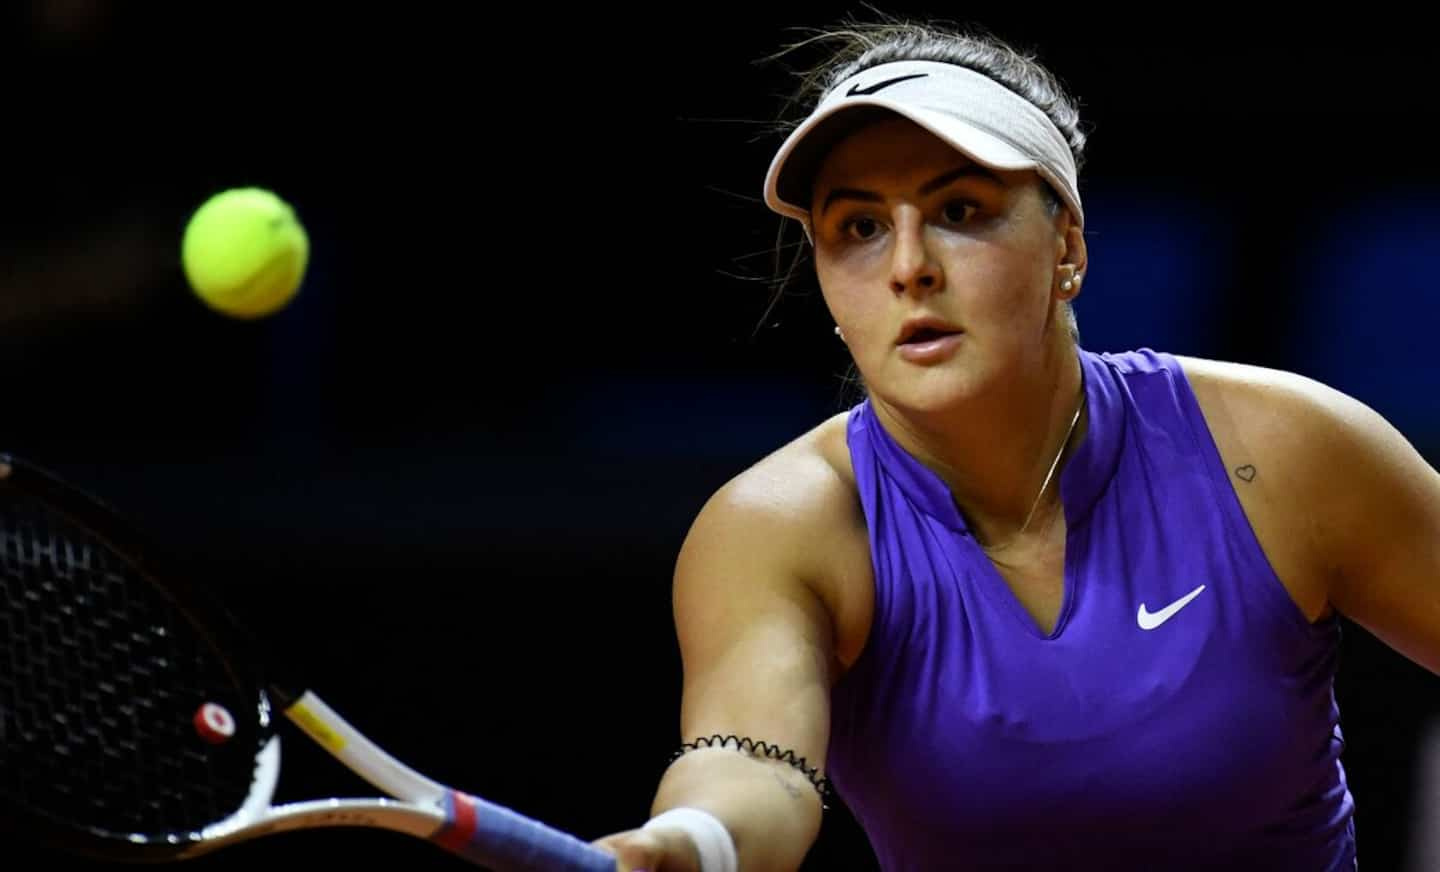 Package for Halep, Andreescu goes directly to the final